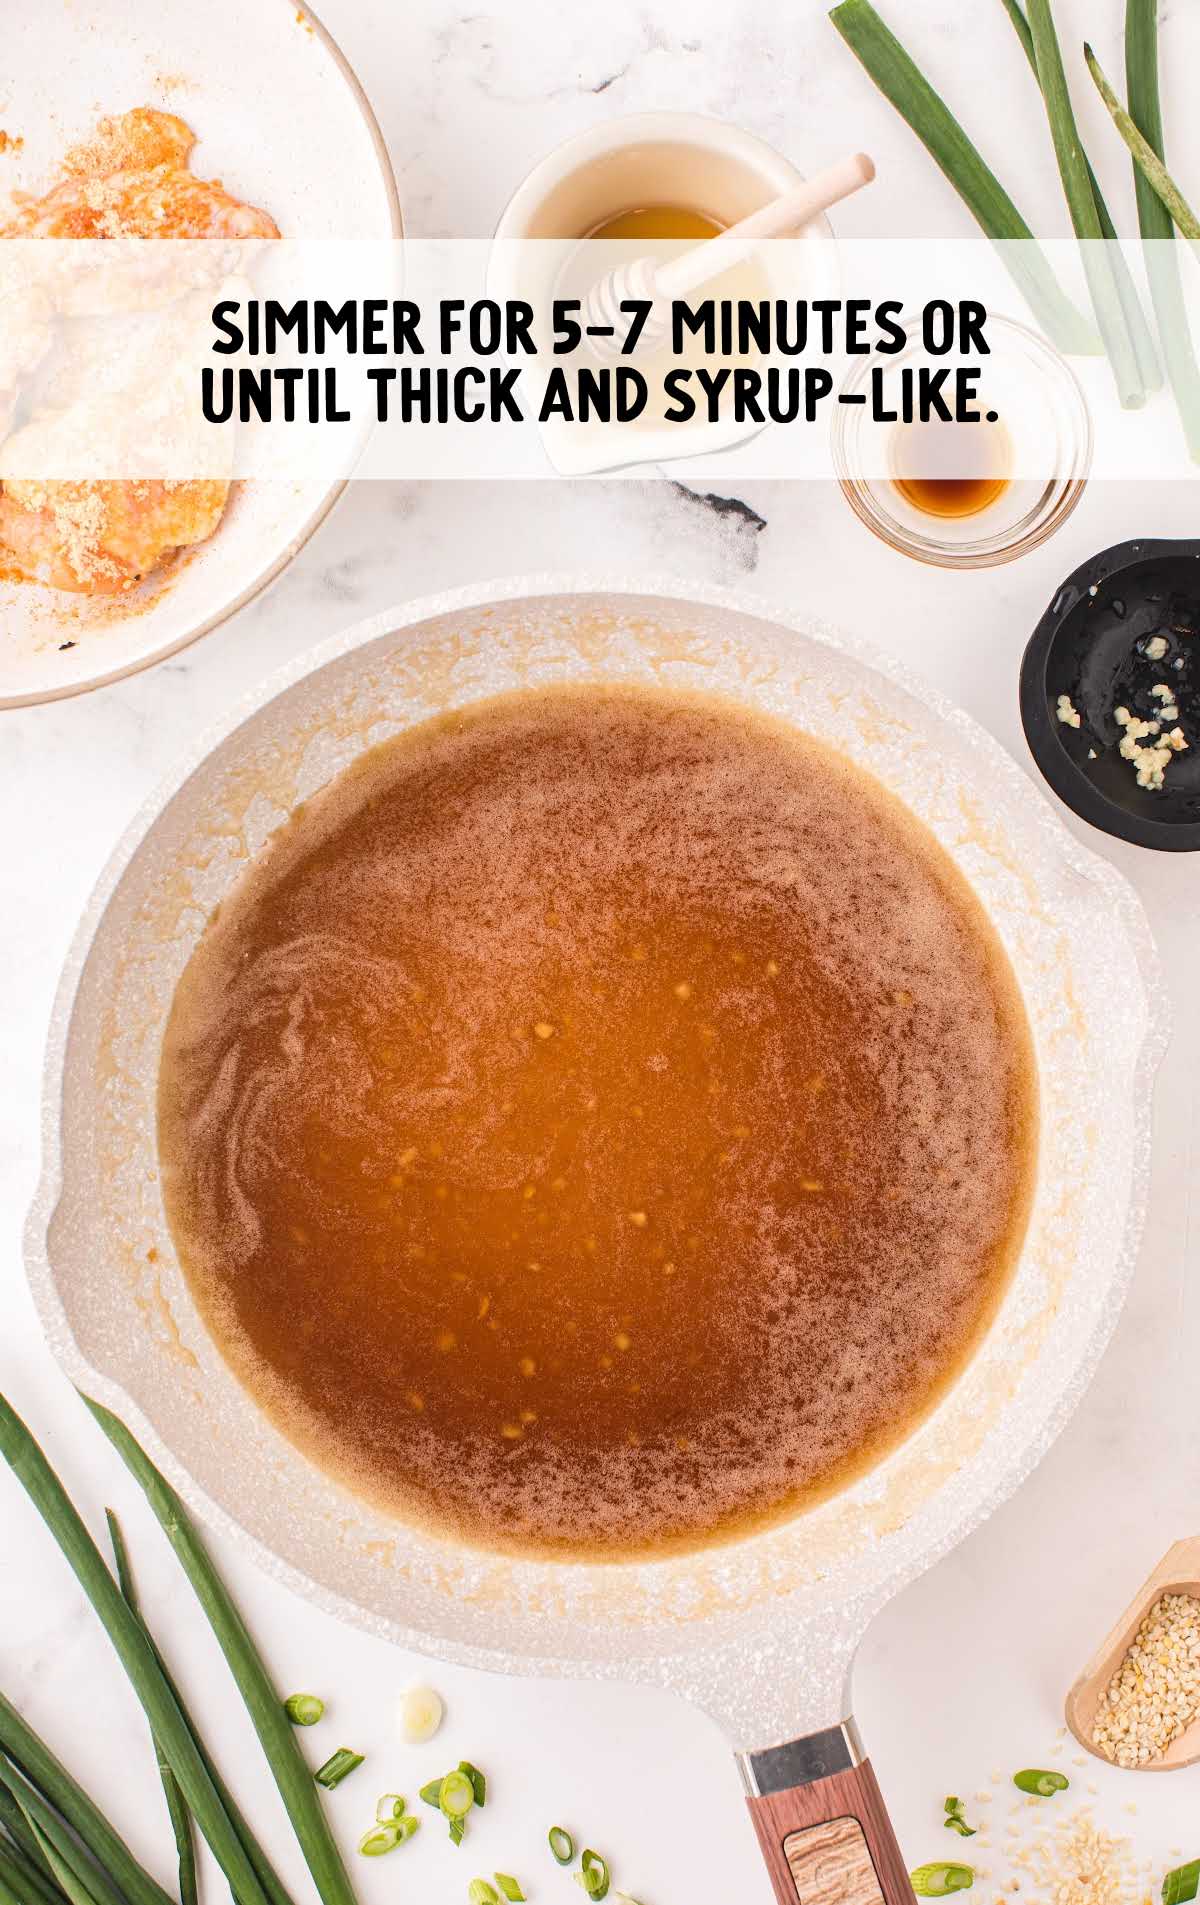 simmer sauce until thick and syrup like